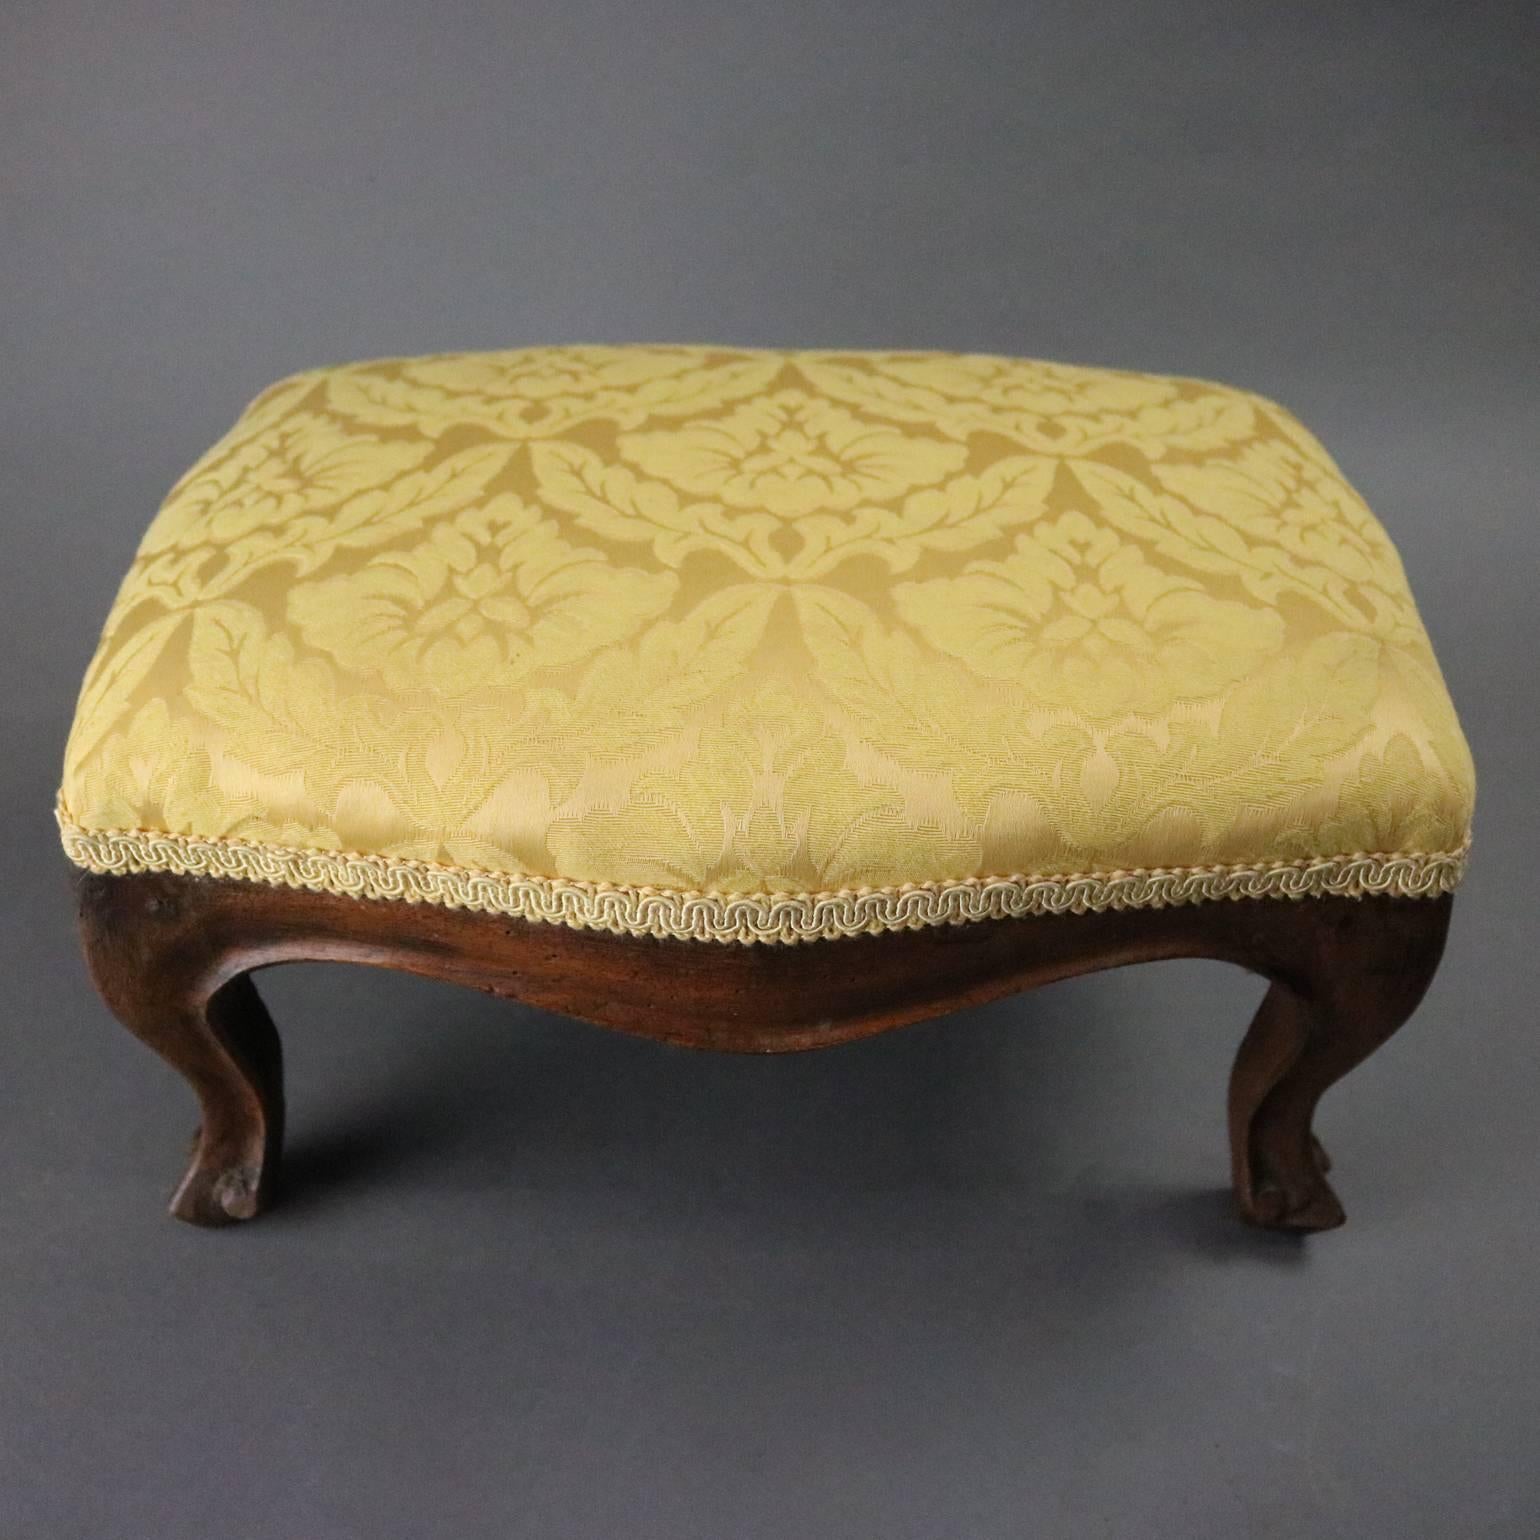 Antique French Louis XV style footstool features carved walnut base with scrolled cabriole legs with upholstered upper, circa 1880

Measures: 7.5" Hx 14.5" W x 11" D.